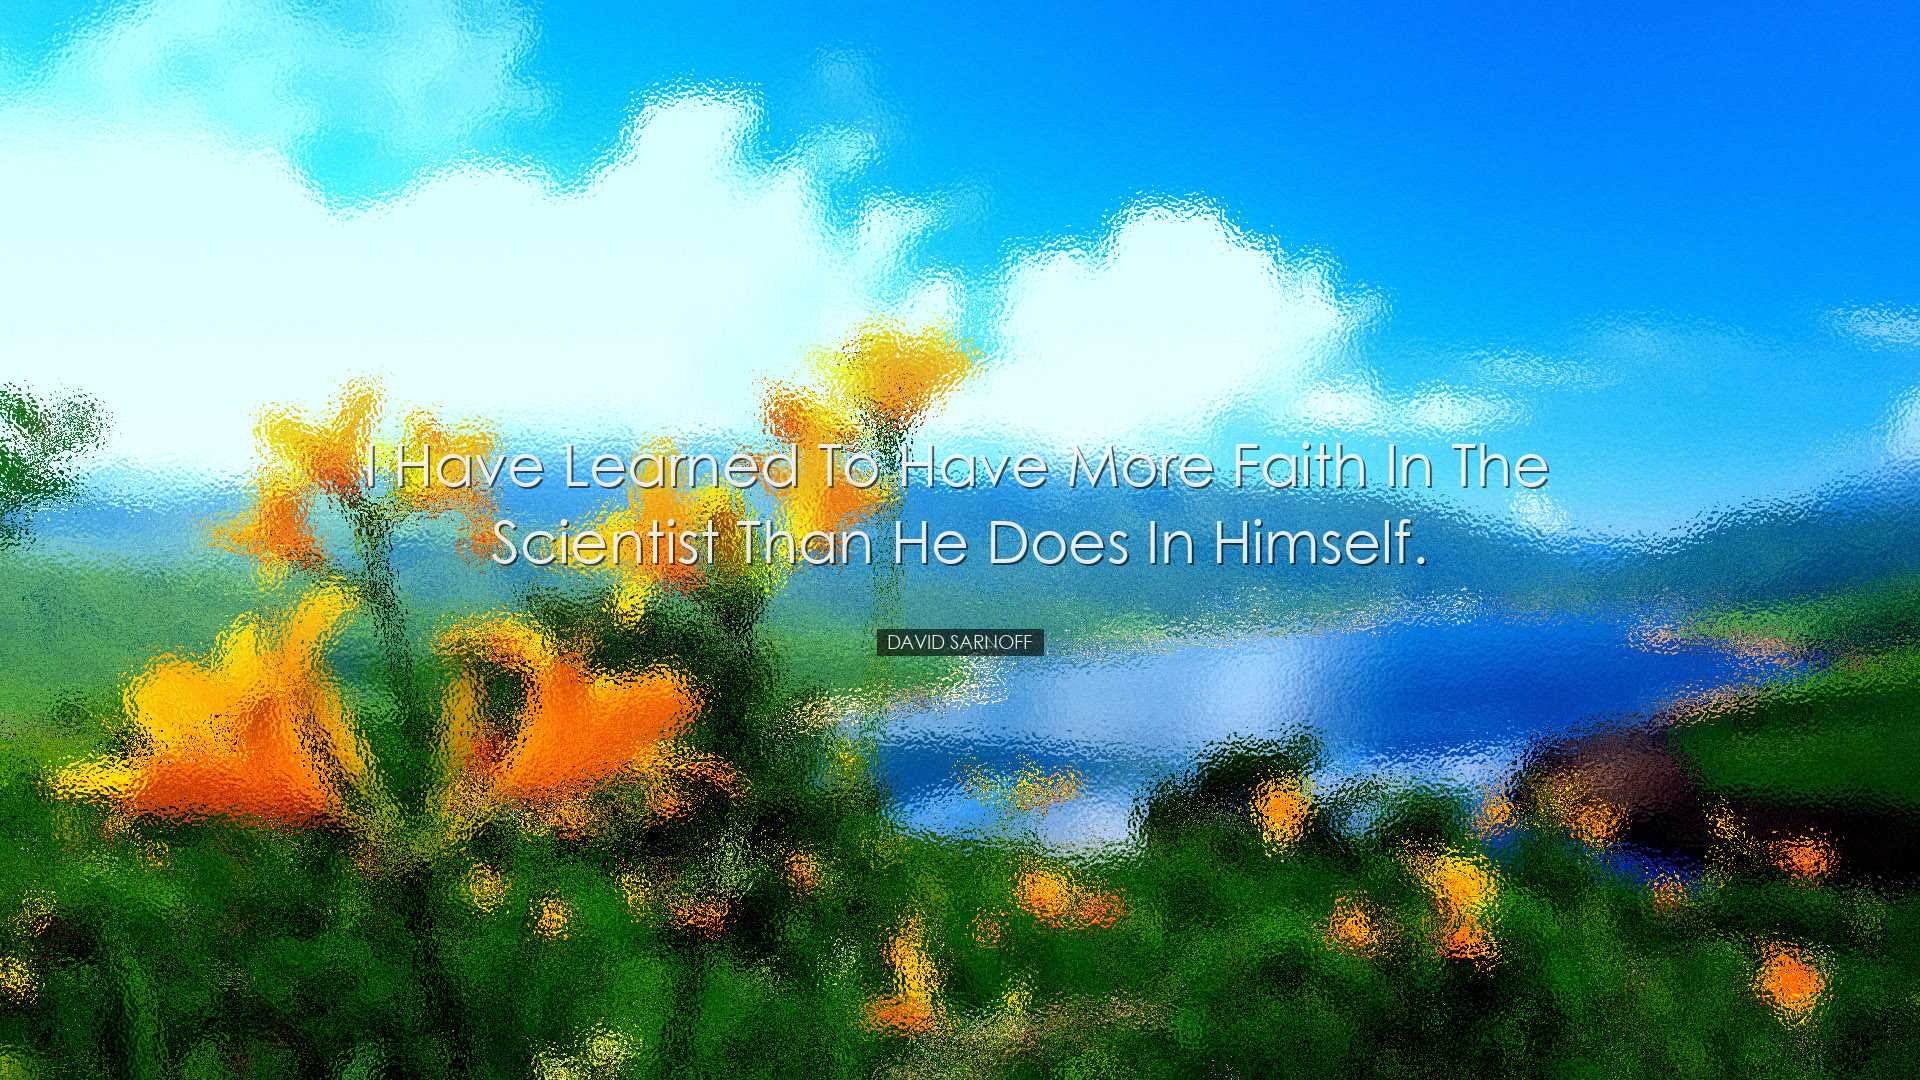 I have learned to have more faith in the scientist than he does in